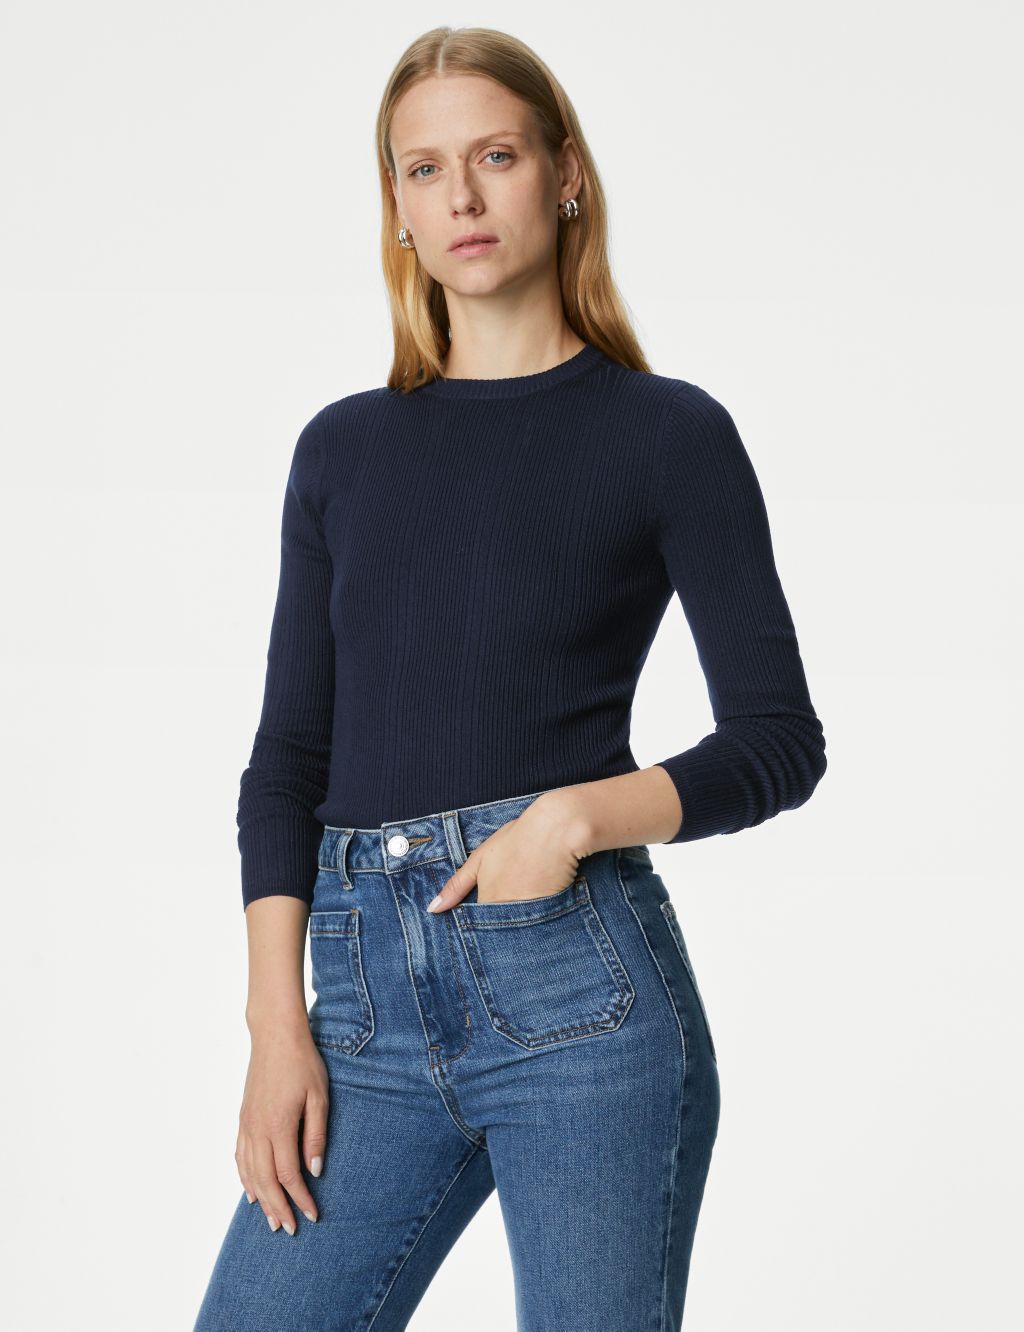 Ribbed Crew Neck Fitted Knitted Top image 3